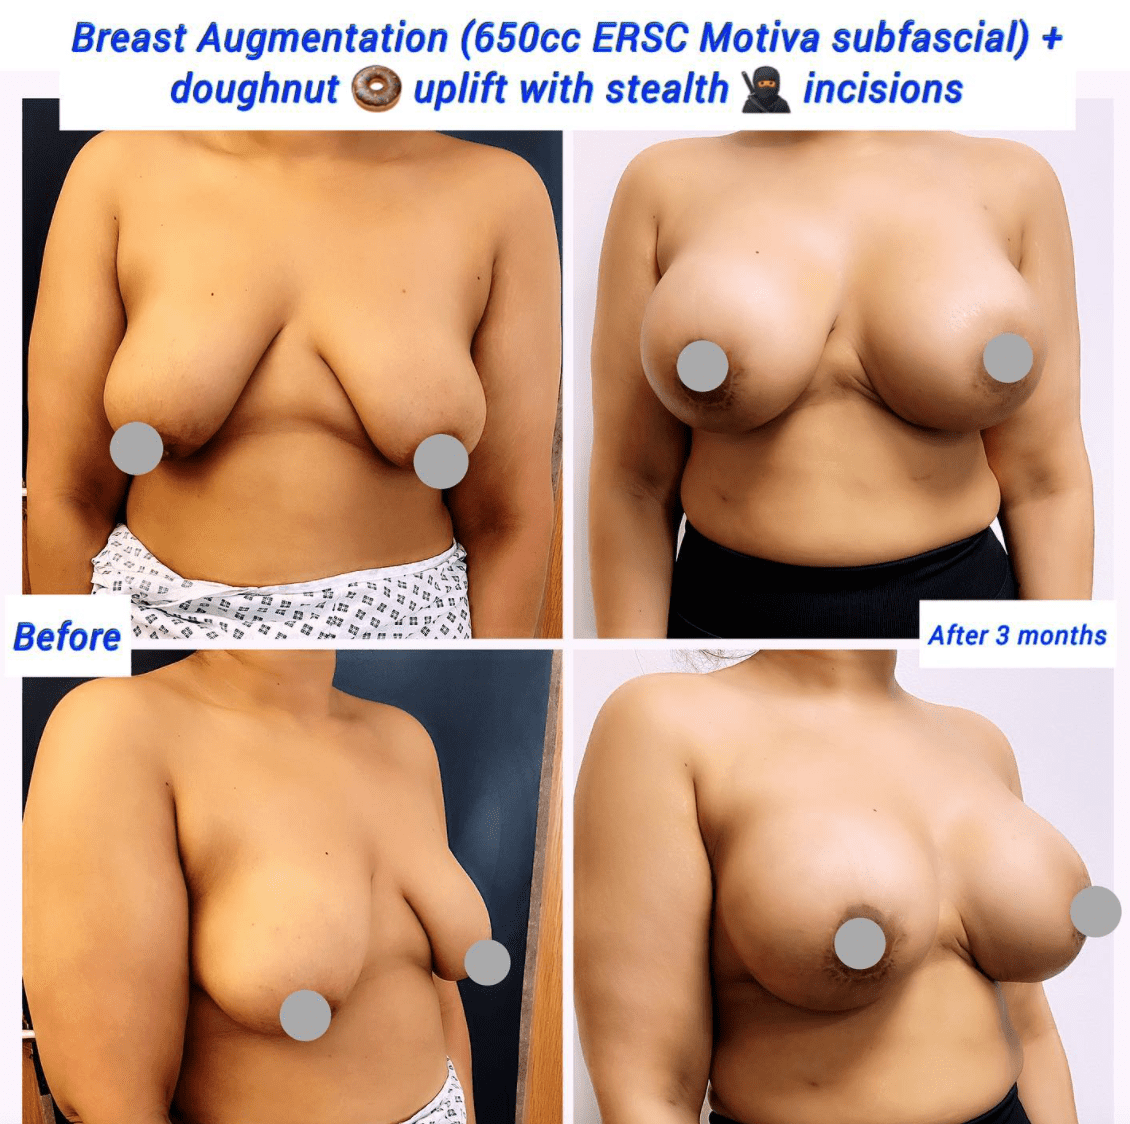 Before and after breast augmentation and doughnut uplift